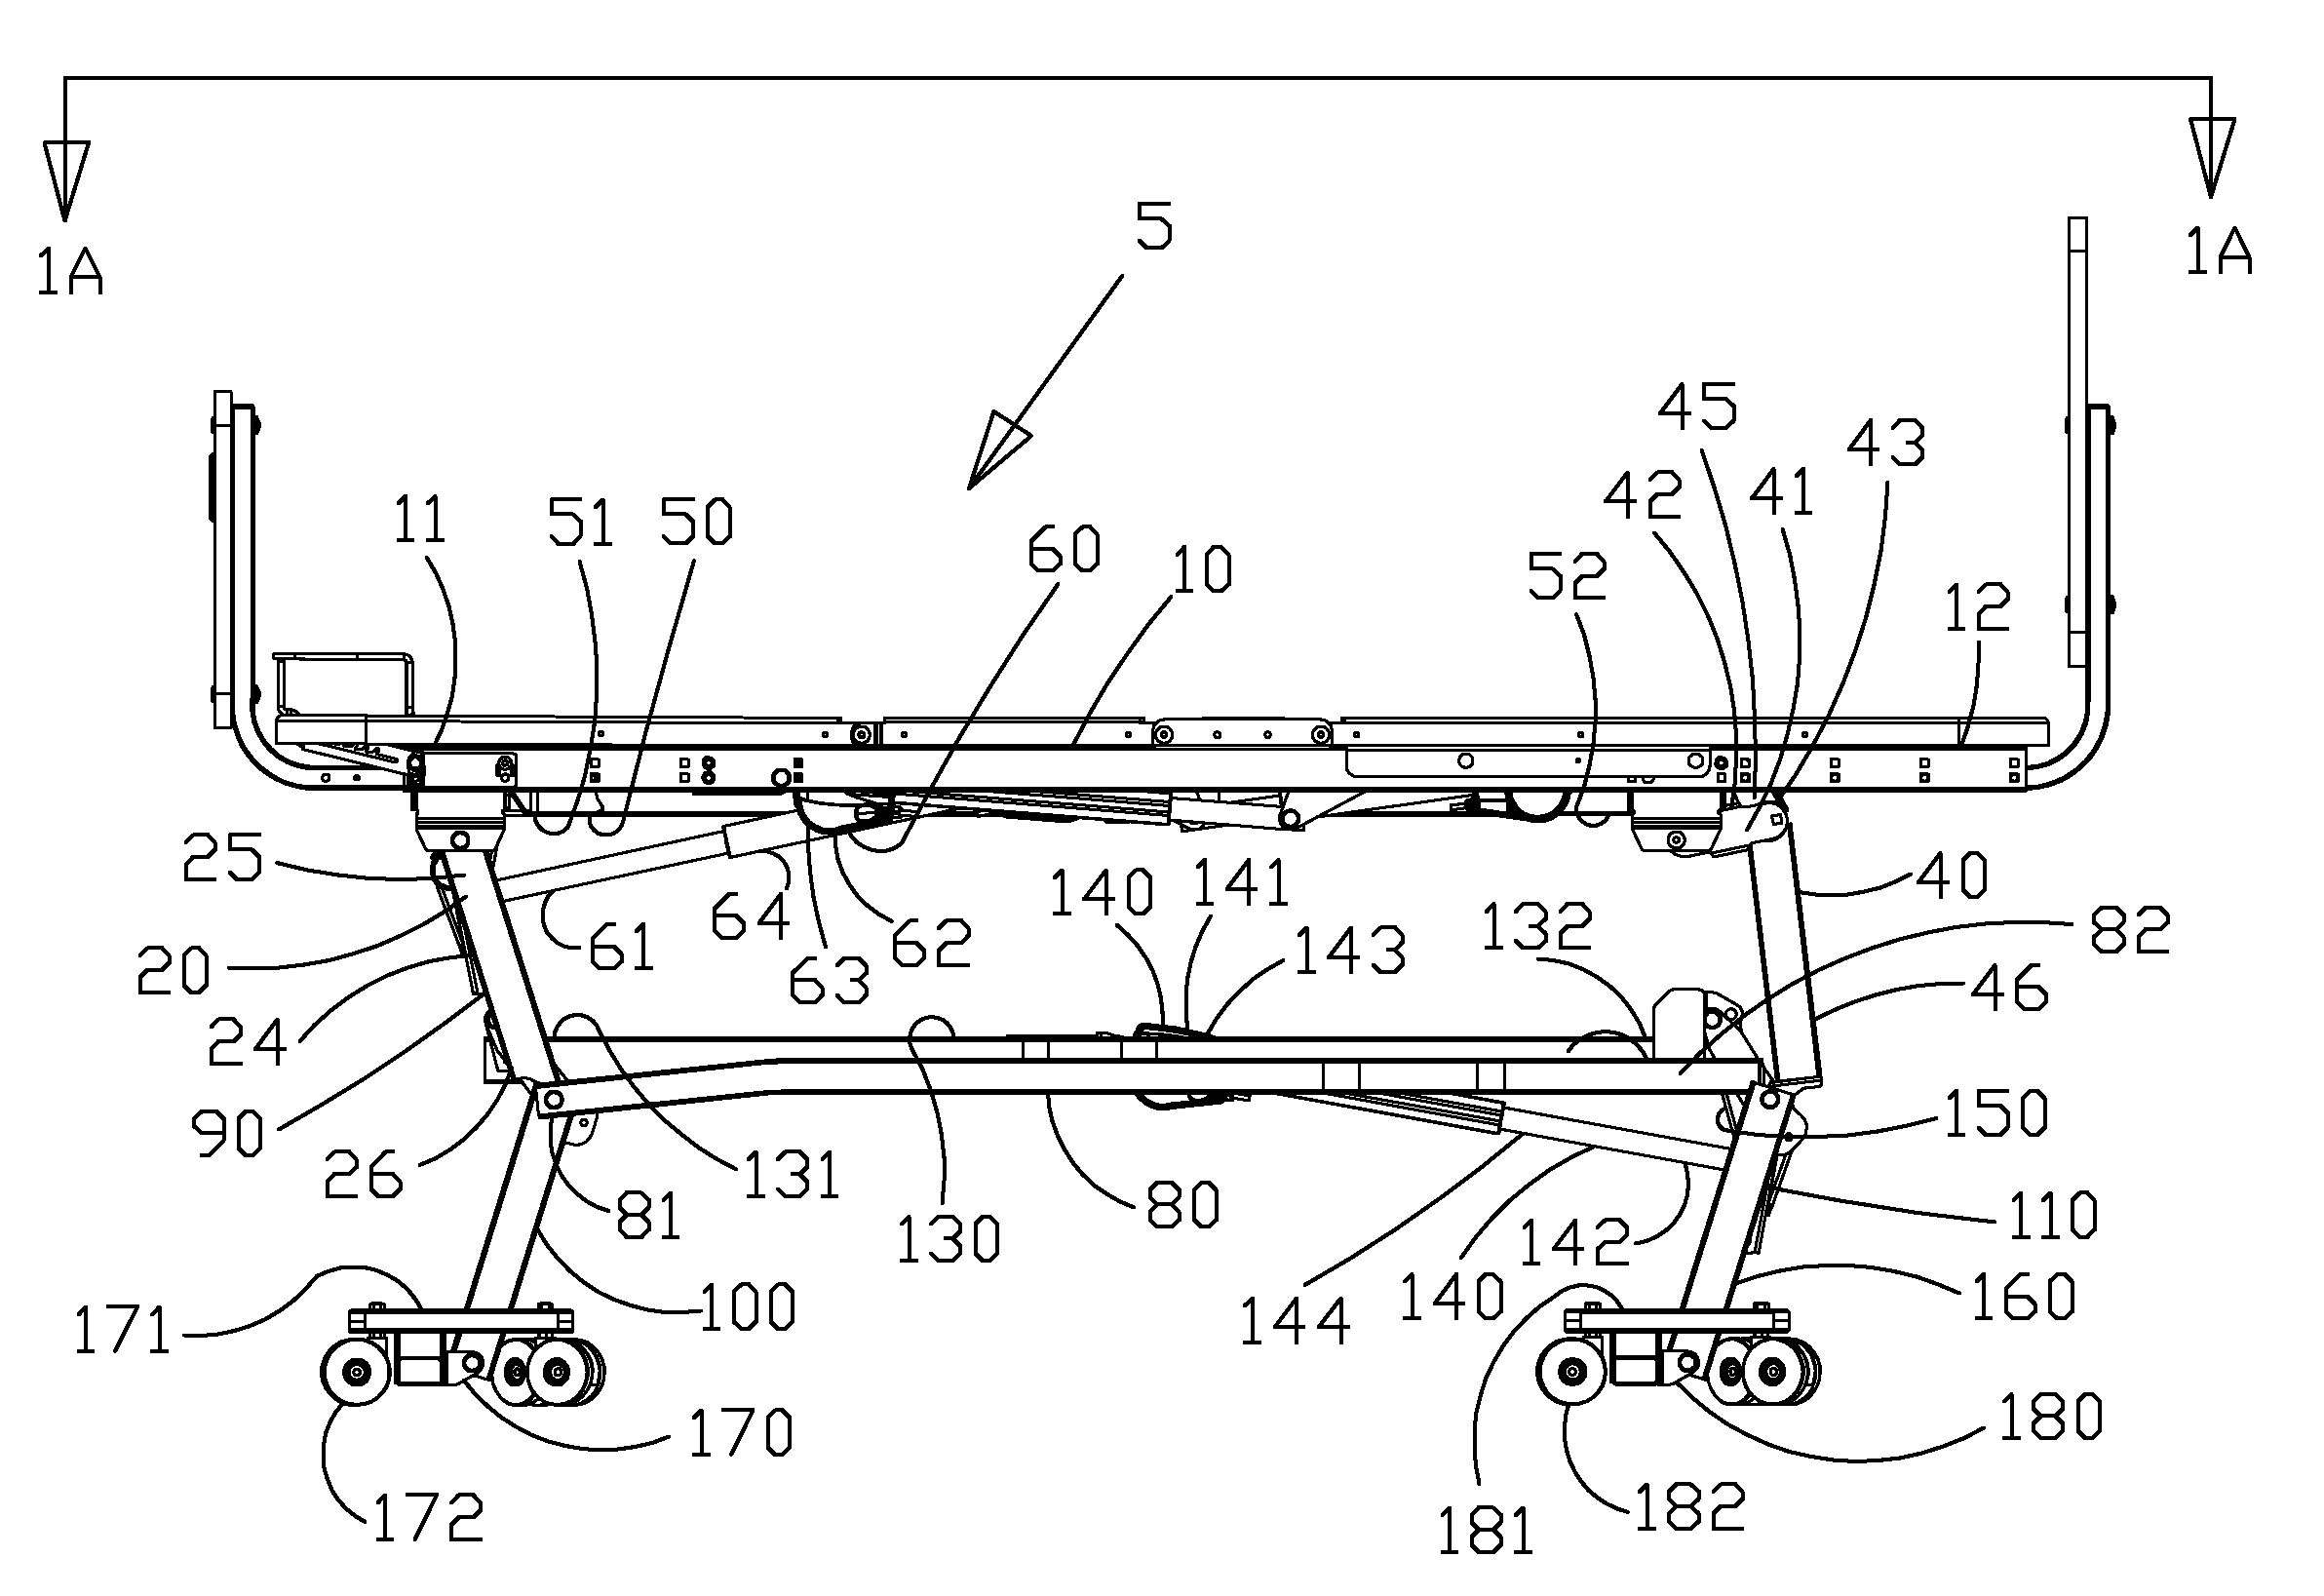 Height adjustable apparatus with control arm